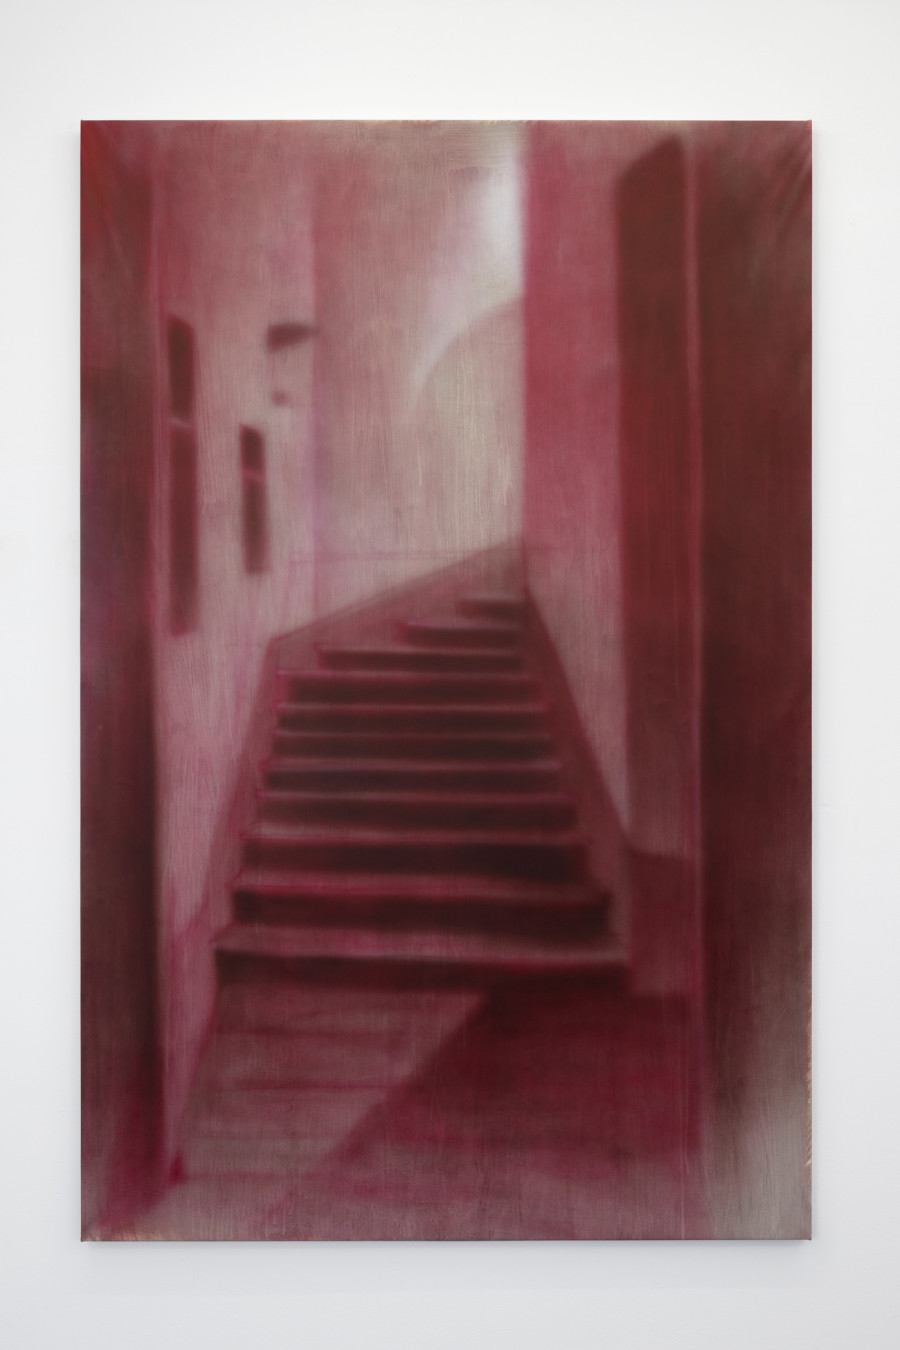 Will Sheldon, Untitled (Red), 2022, Airbrushed acrylic on canvas, 216 × 140 cm. Courtesy: Weiss Falk and the Artist. Photo: Gina Folly